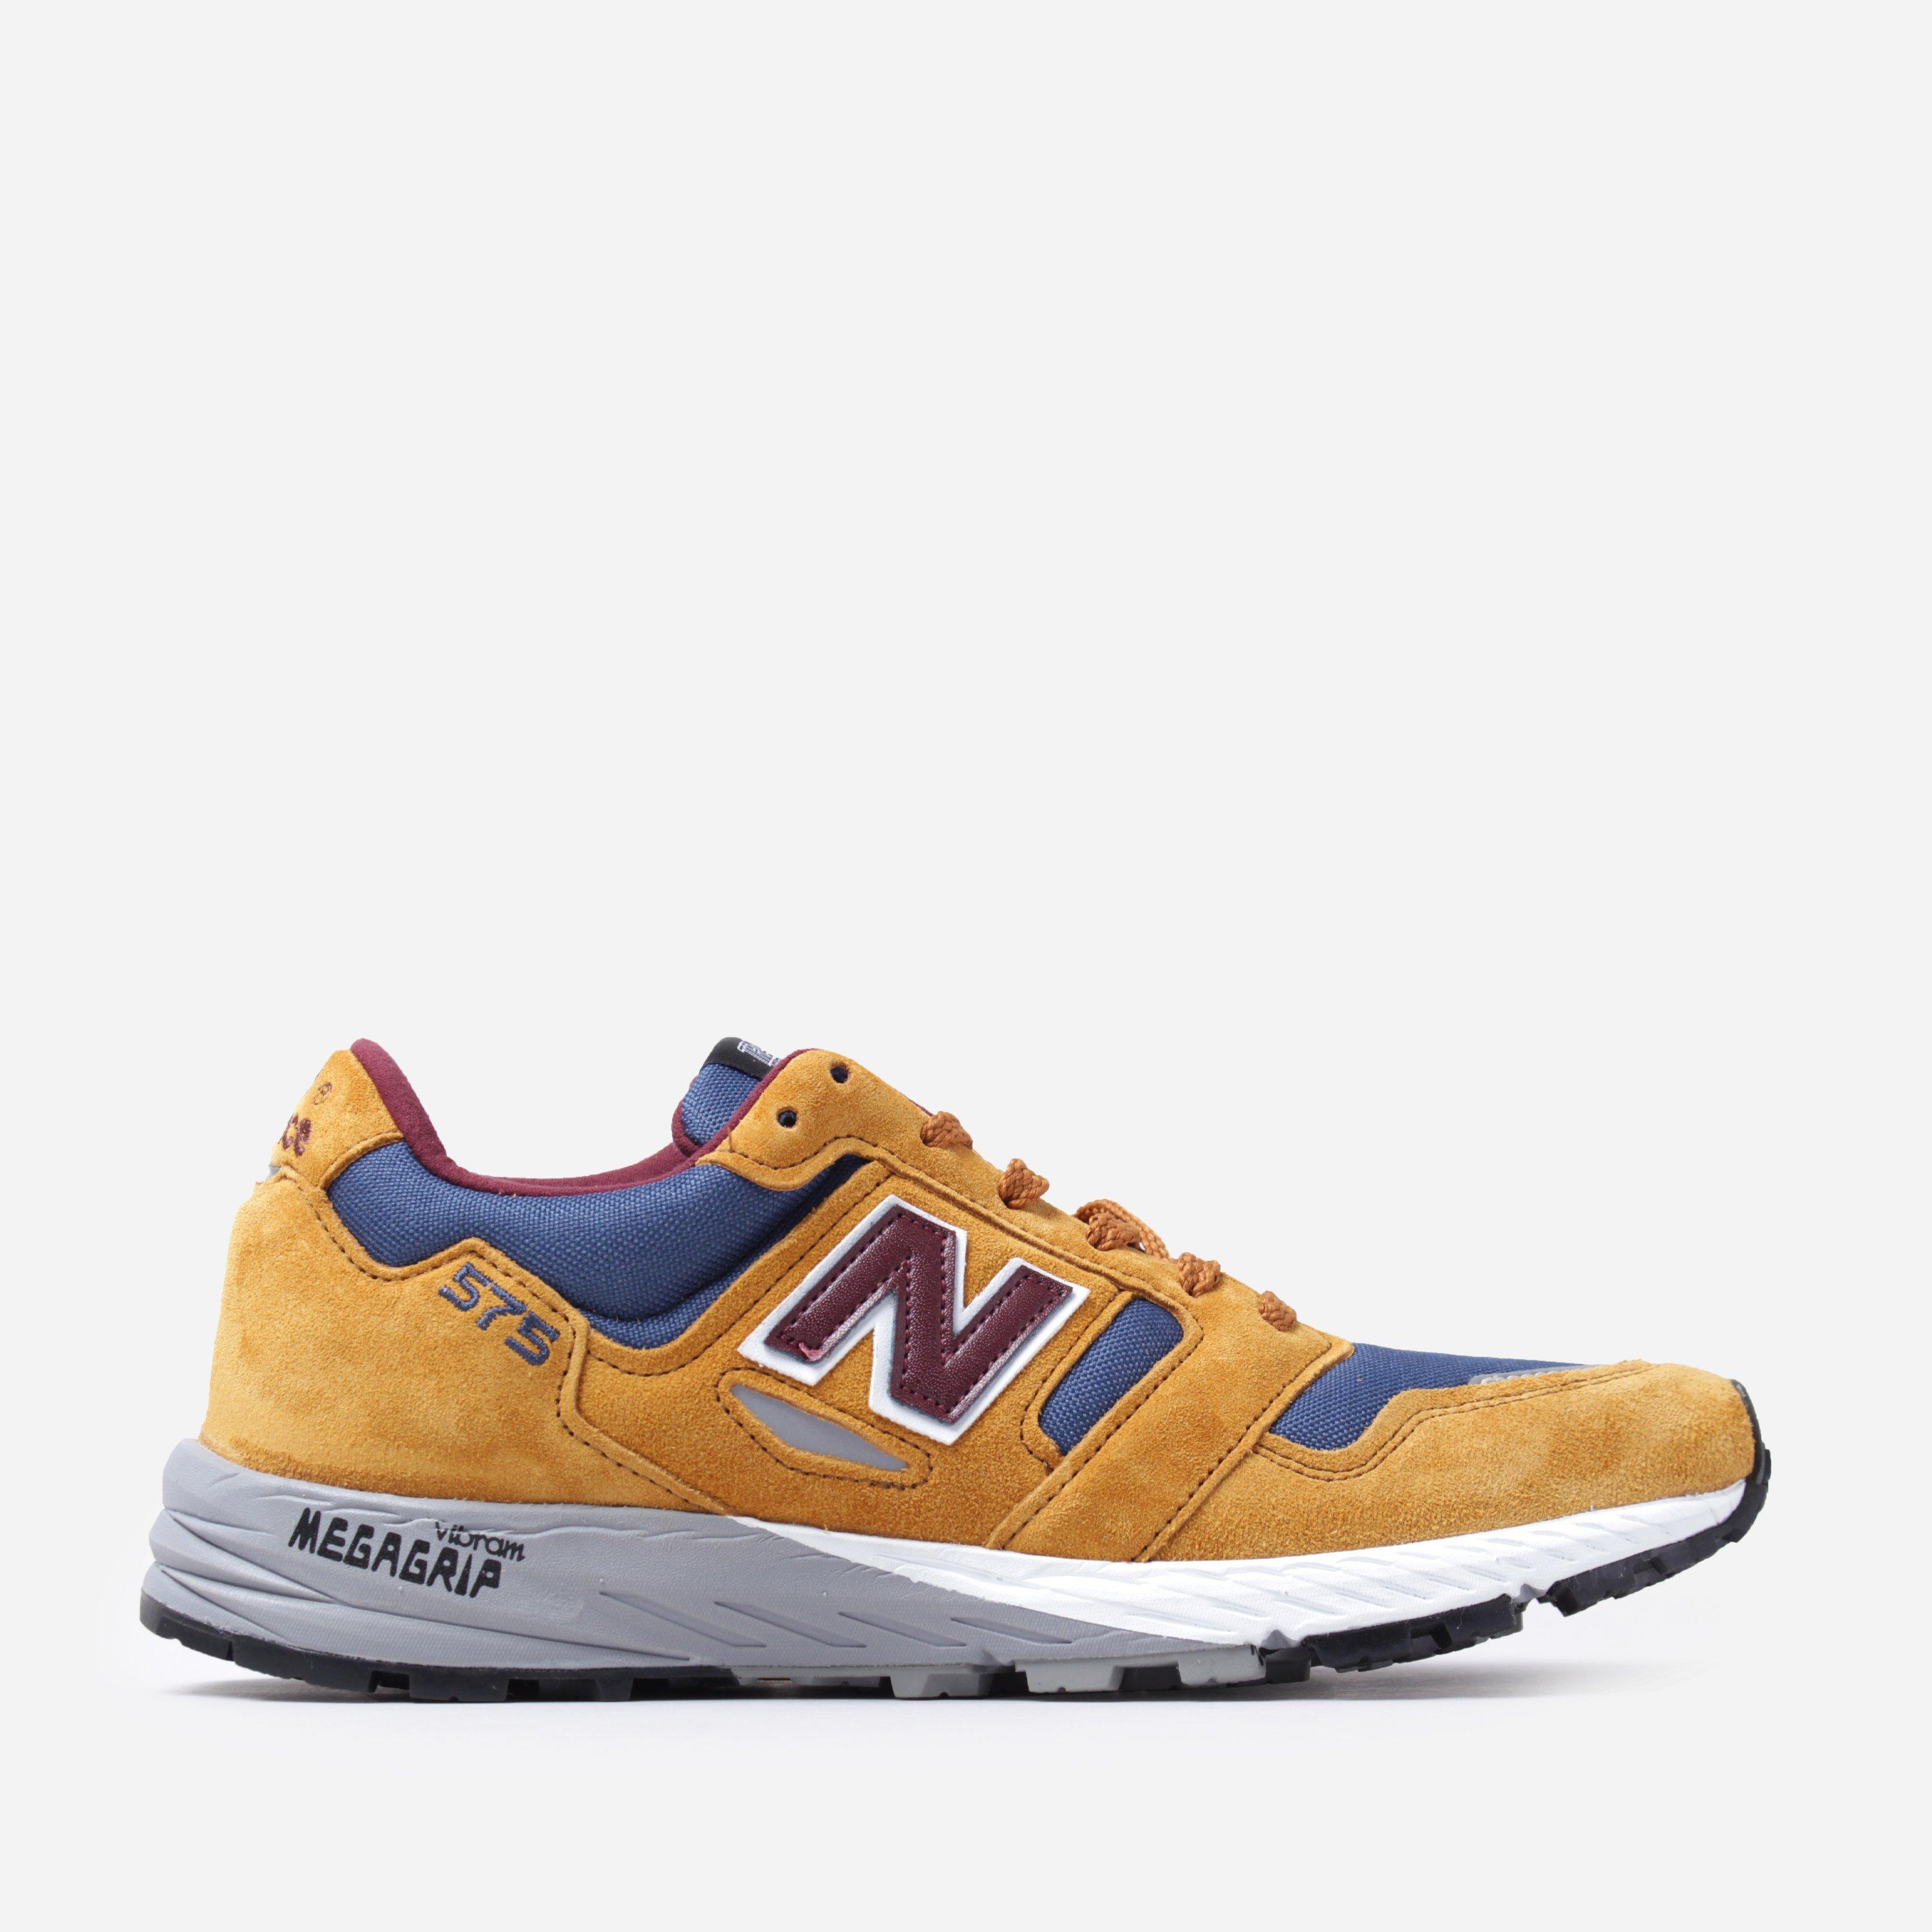 New Balance Trail 575 Suede Mustard & Blue Mesh Trainers for Men ...